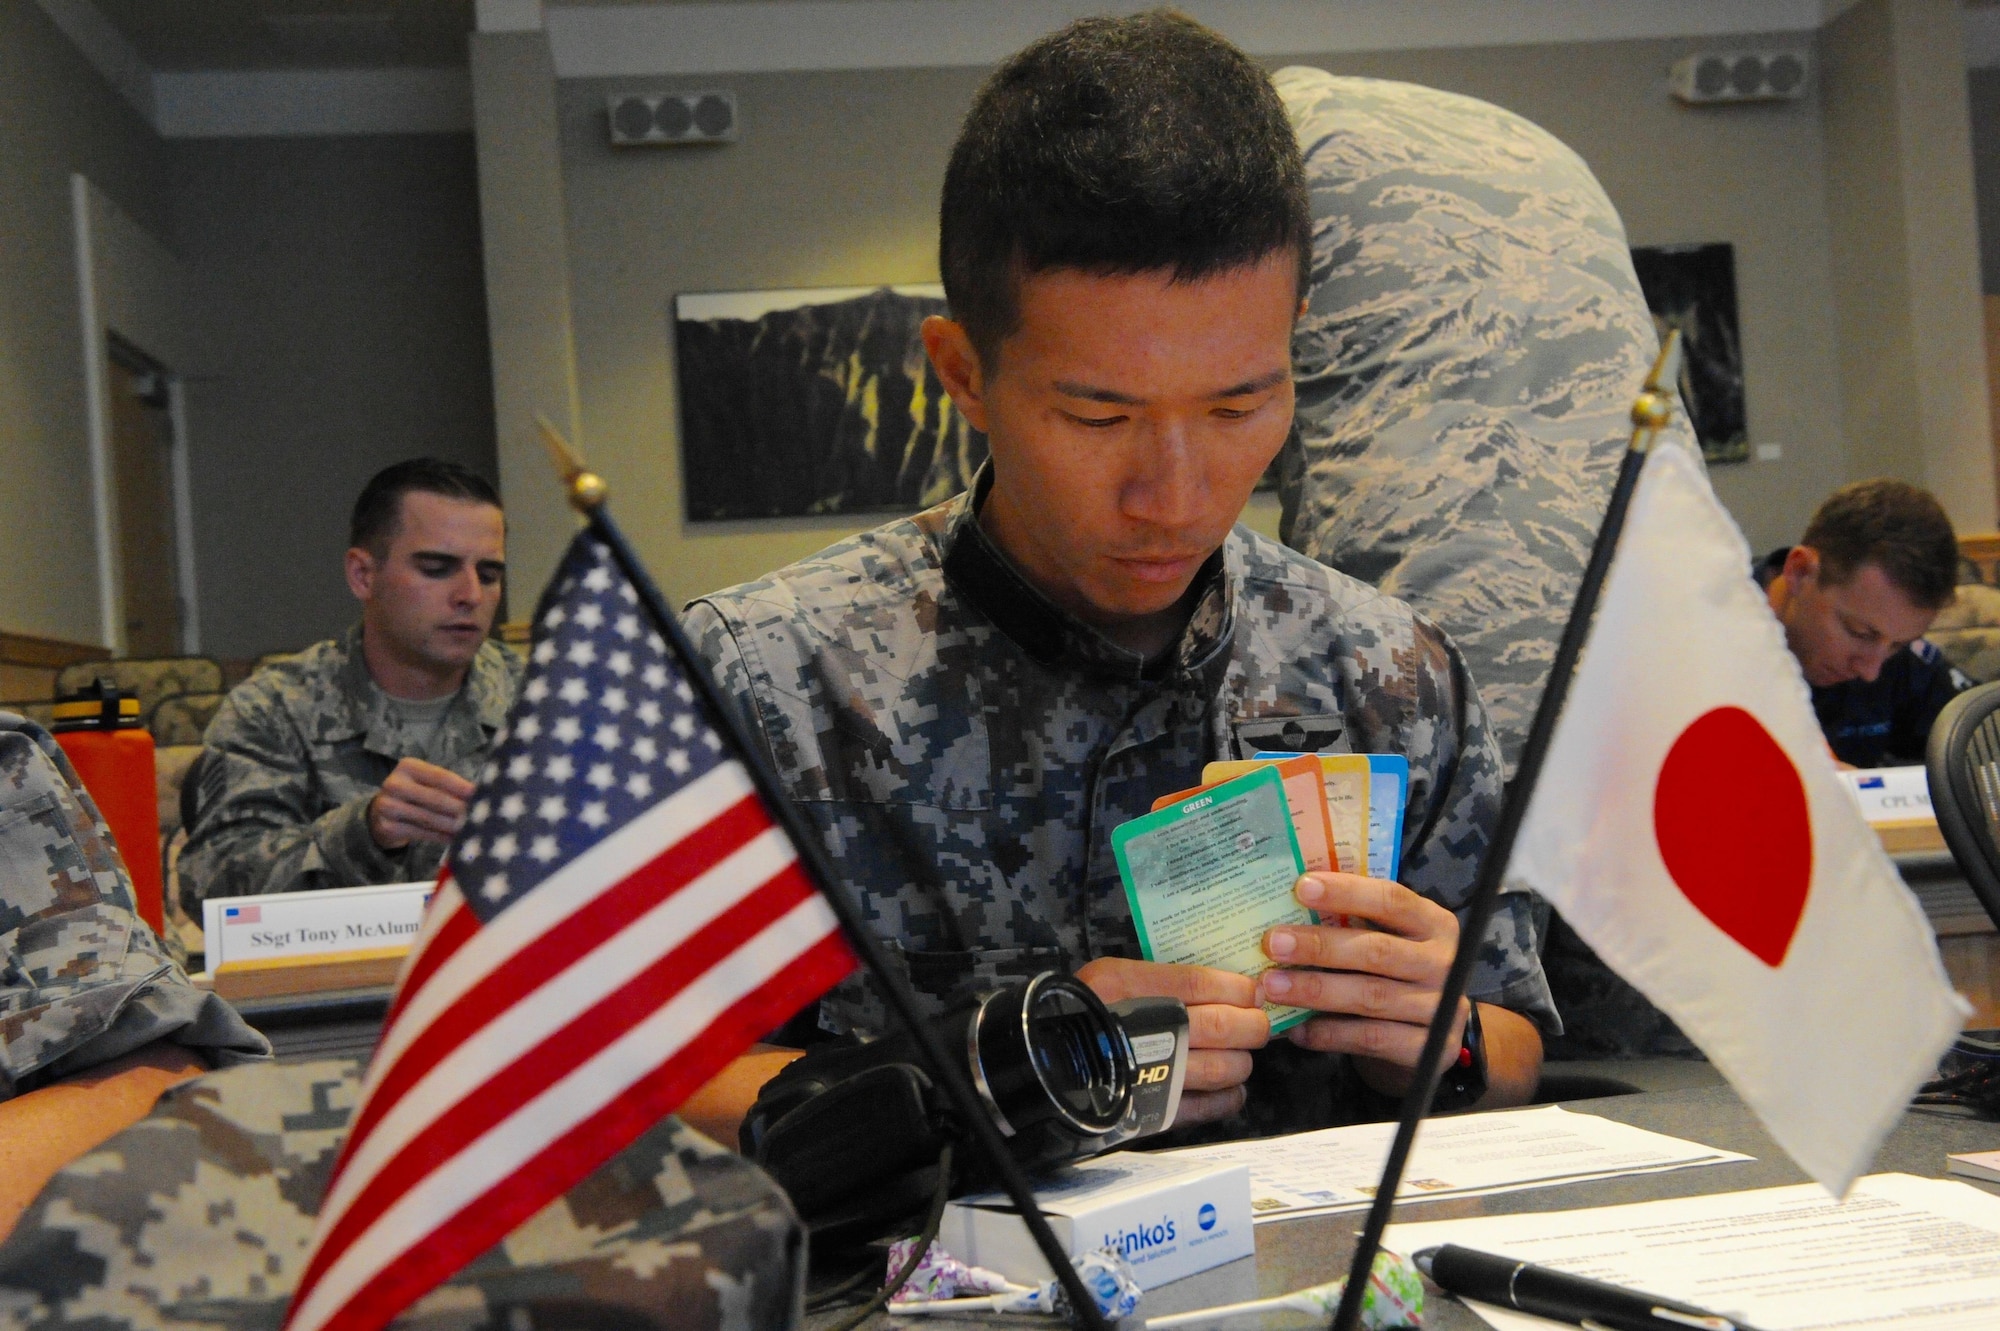 Tech. Sgt. Yuki Kawagoe, a pararescue jumper with the Japan Air Self-Defense Force, Akita Air Station, Air Rescue Wing, Japan, completes the "True Colors" self-assessment during the first U.S. led, Pacific Rim Junior Enlisted Leadership Forum (JELF) at Joint Base Pearl Harbor-Hickam, Hawaii, Aug 8. 2016. The JASDF represented one of the 11 different countries that came together to share experiences and to gain valuable insight on leadership, further developing U.S. alliances and partnerships across the Pacific.  (U.S. Air Force photo by Staff Sgt. Kamaile Chan)